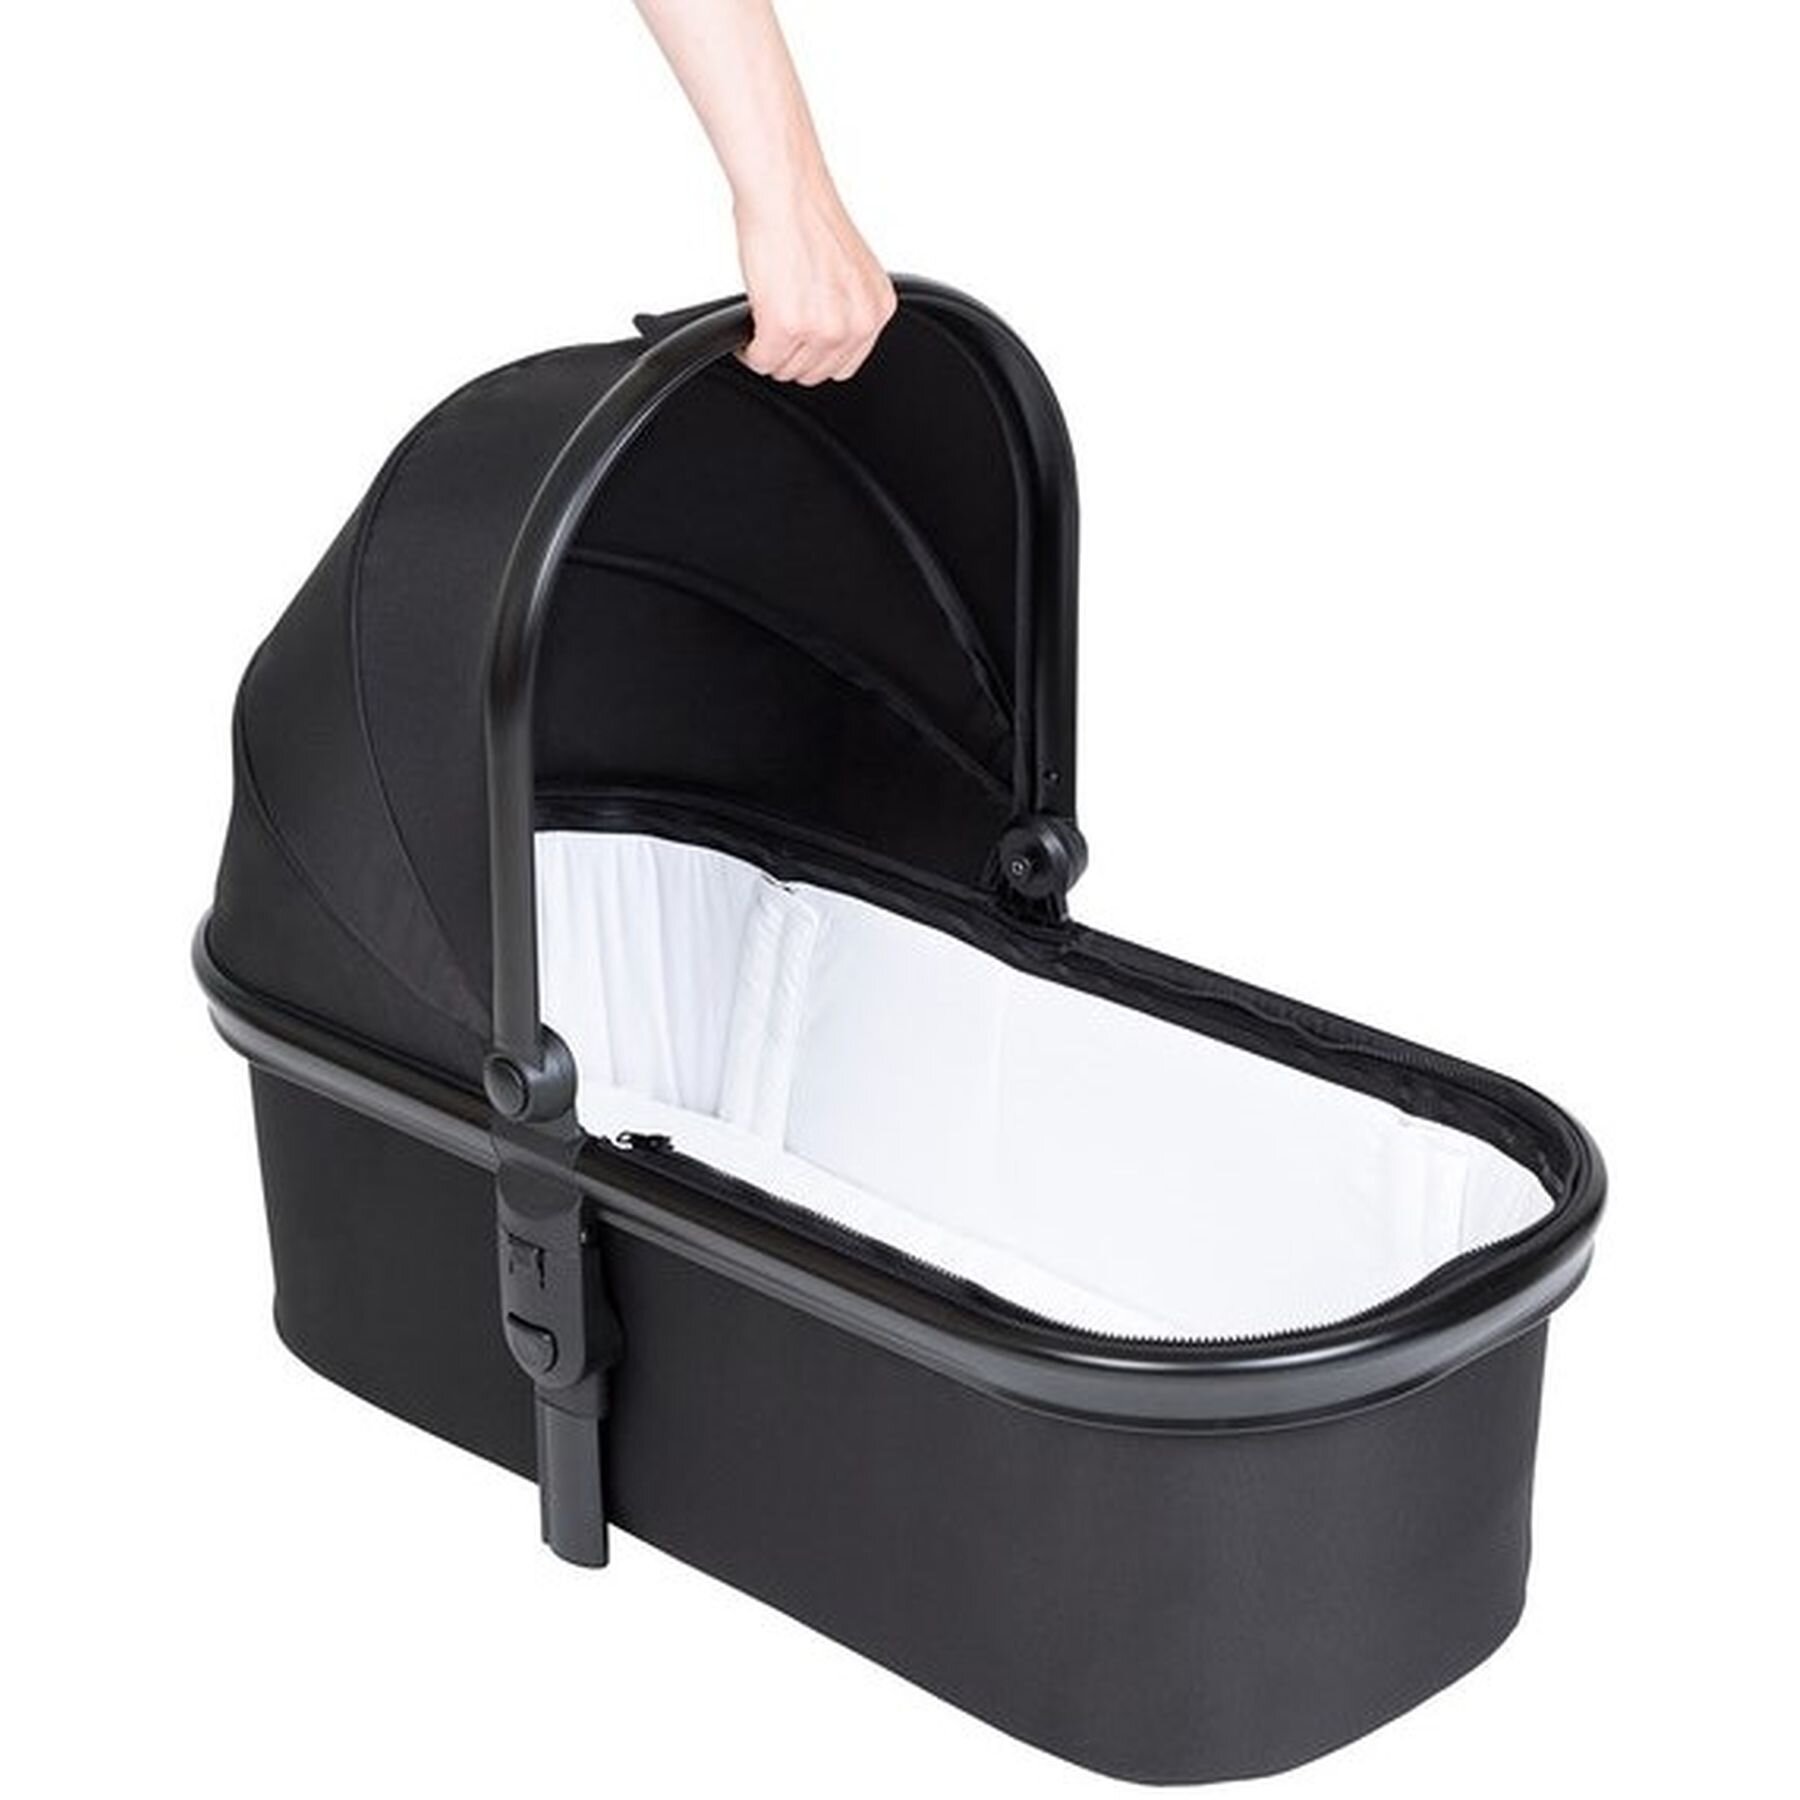 phil and teds dot carrycot